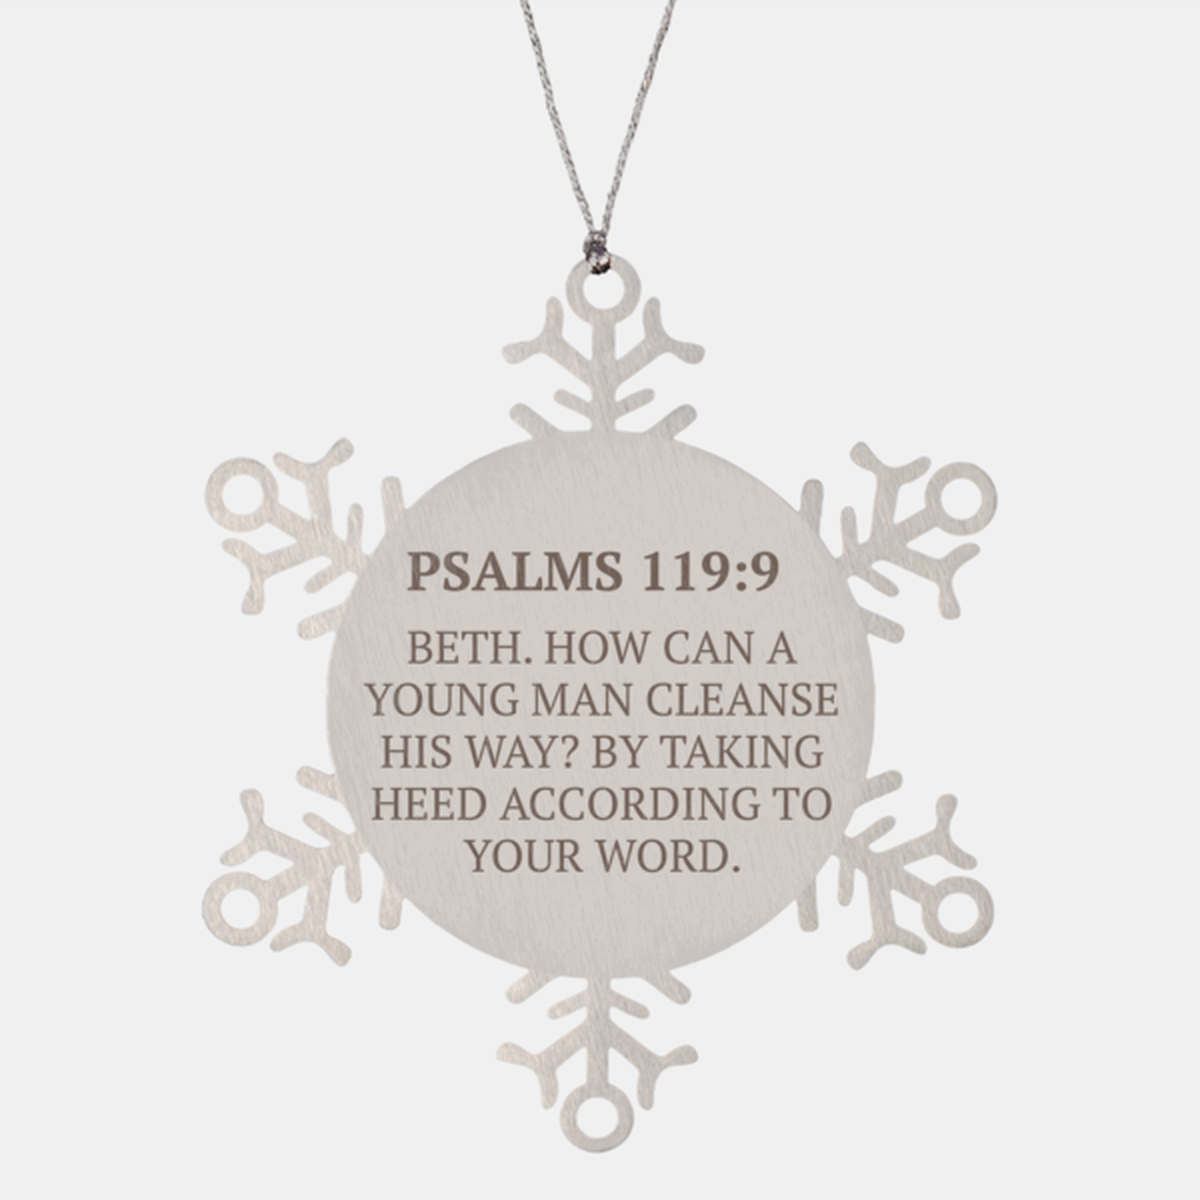 Christian Ornaments For Christmas Tree, Beth. How Can A Young Man Cleanse His Way?, Religious Christmas Decorations, Scripture Ornaments Gifts, Bible Verse Ornament